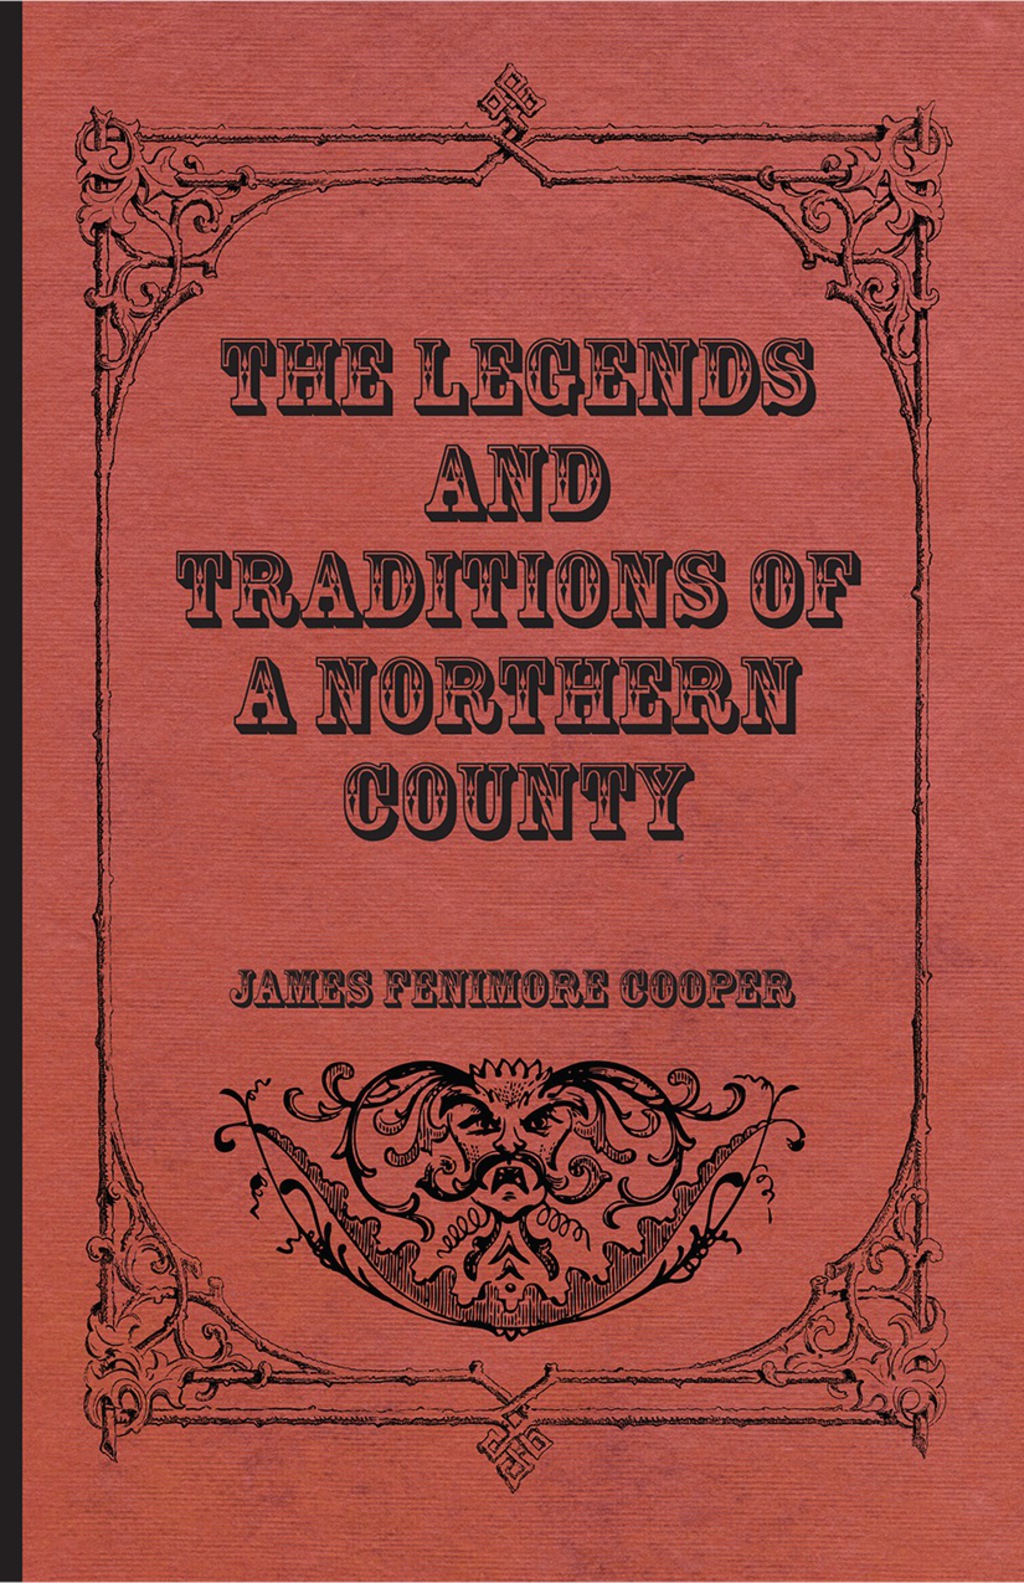 The Legends and Traditions of a Northern County (eBook) - James Fenimore Cooper